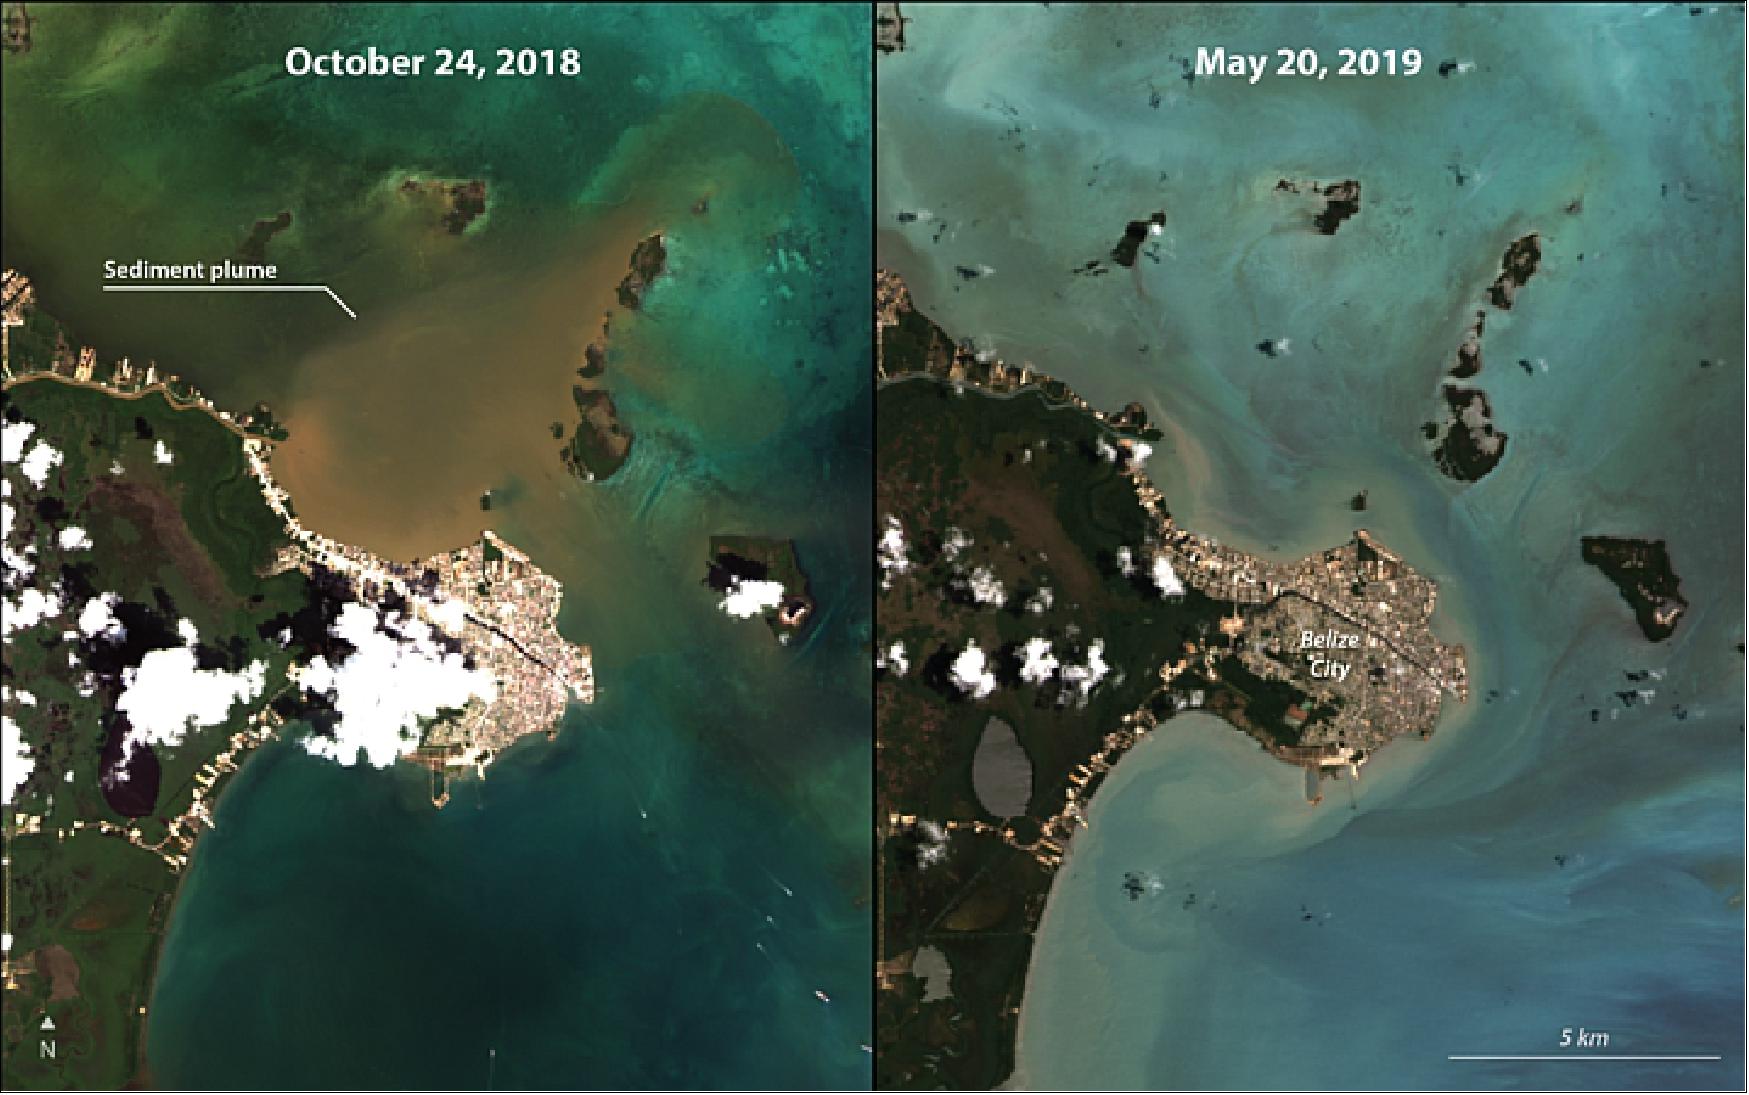 Figure 72: Left: A Landsat-8 image from October 2018 shows a sediment plume originating from the mouth of the Belize River, extending 8 km out to sea. Right: Relatively clear waters shown in another image from the same satellite from May 2019 (image credit: NASA Earth Observatory)